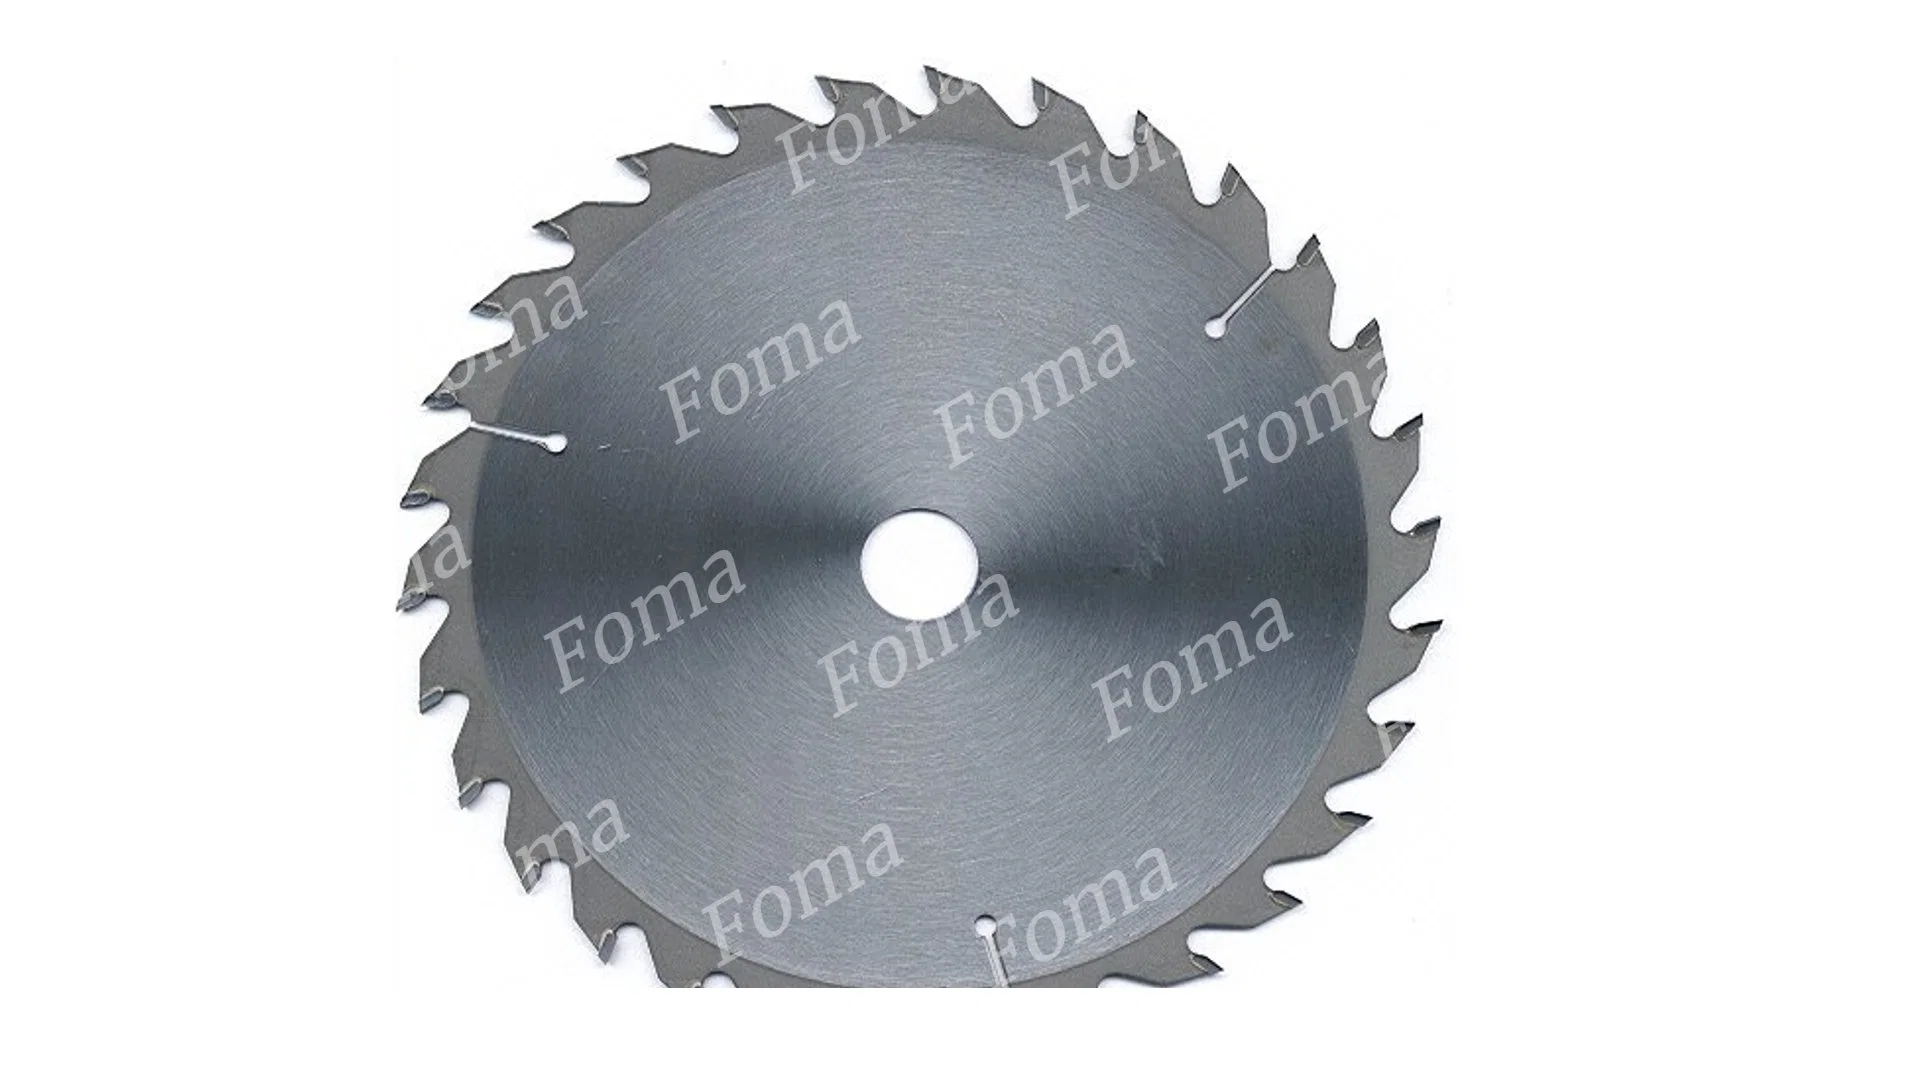 Wood Panel Cutting Blade Carbide Circular Saw Blade for MDF / OSB / Particle Board Size Cutting